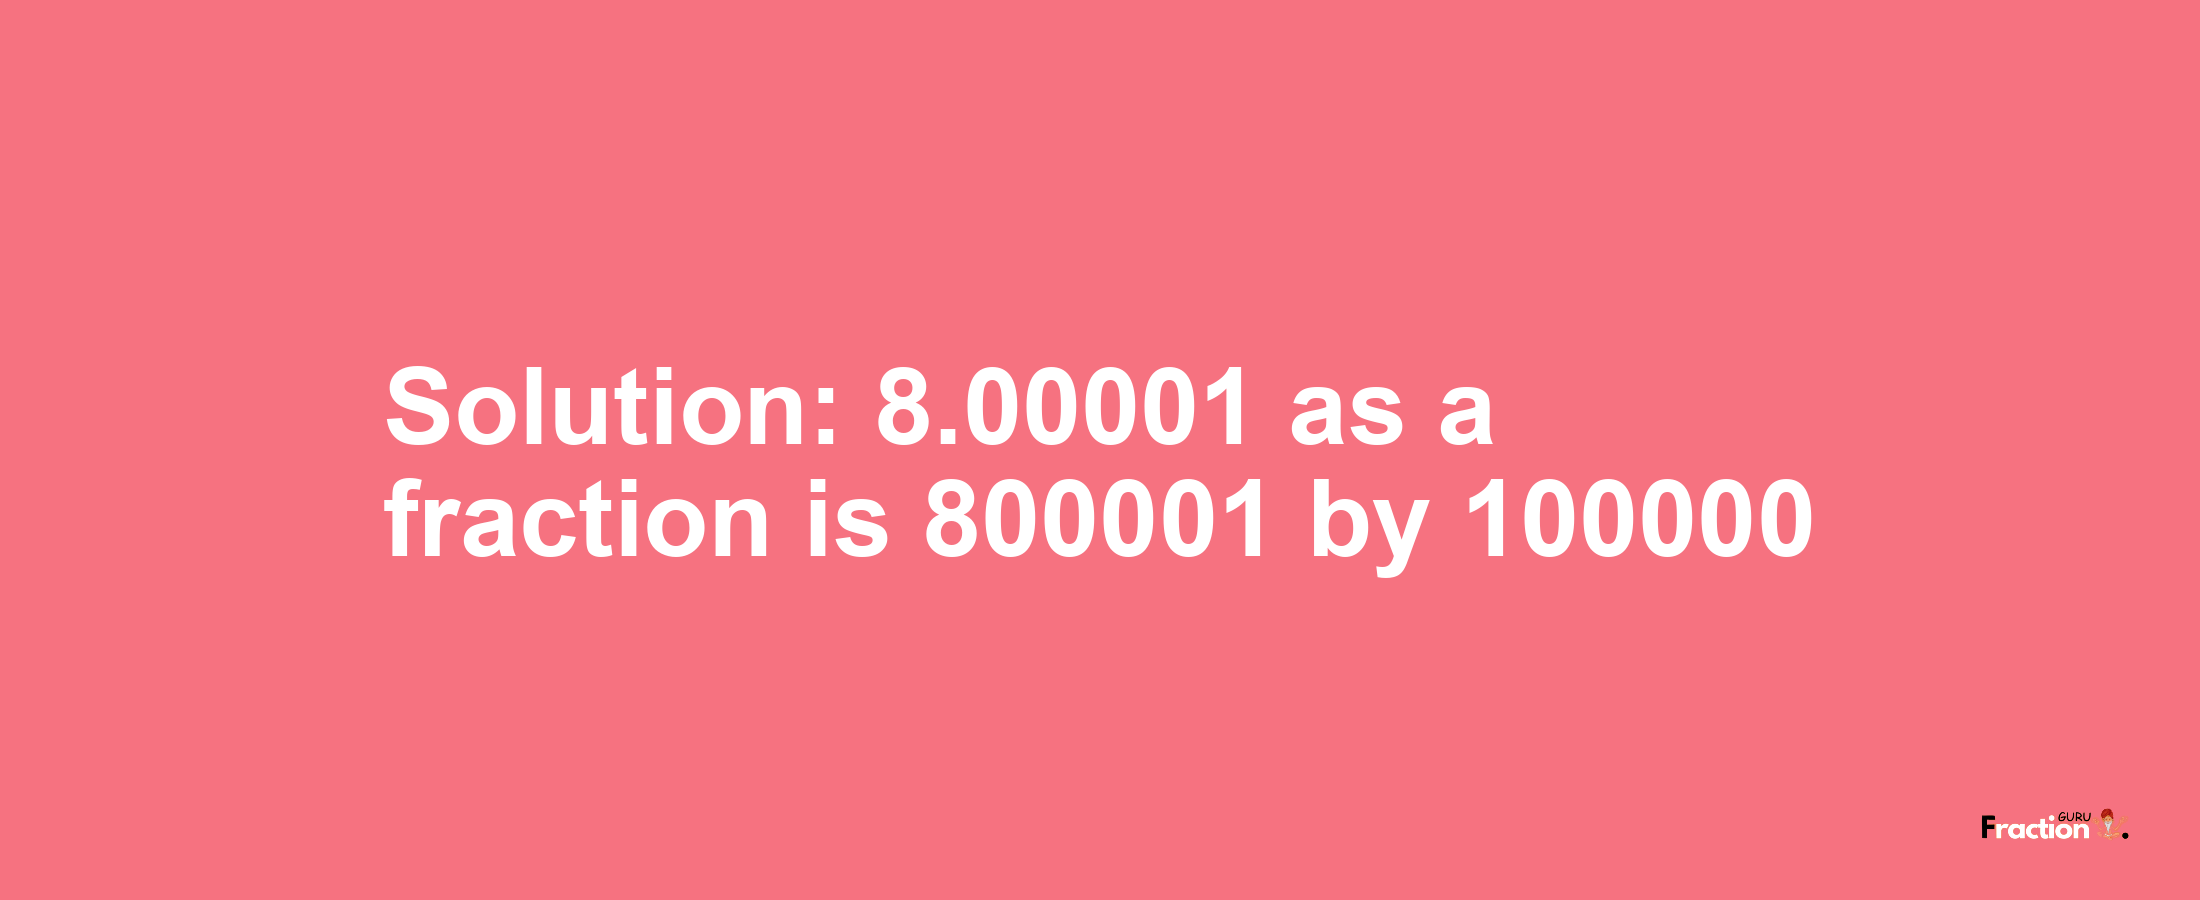 Solution:8.00001 as a fraction is 800001/100000